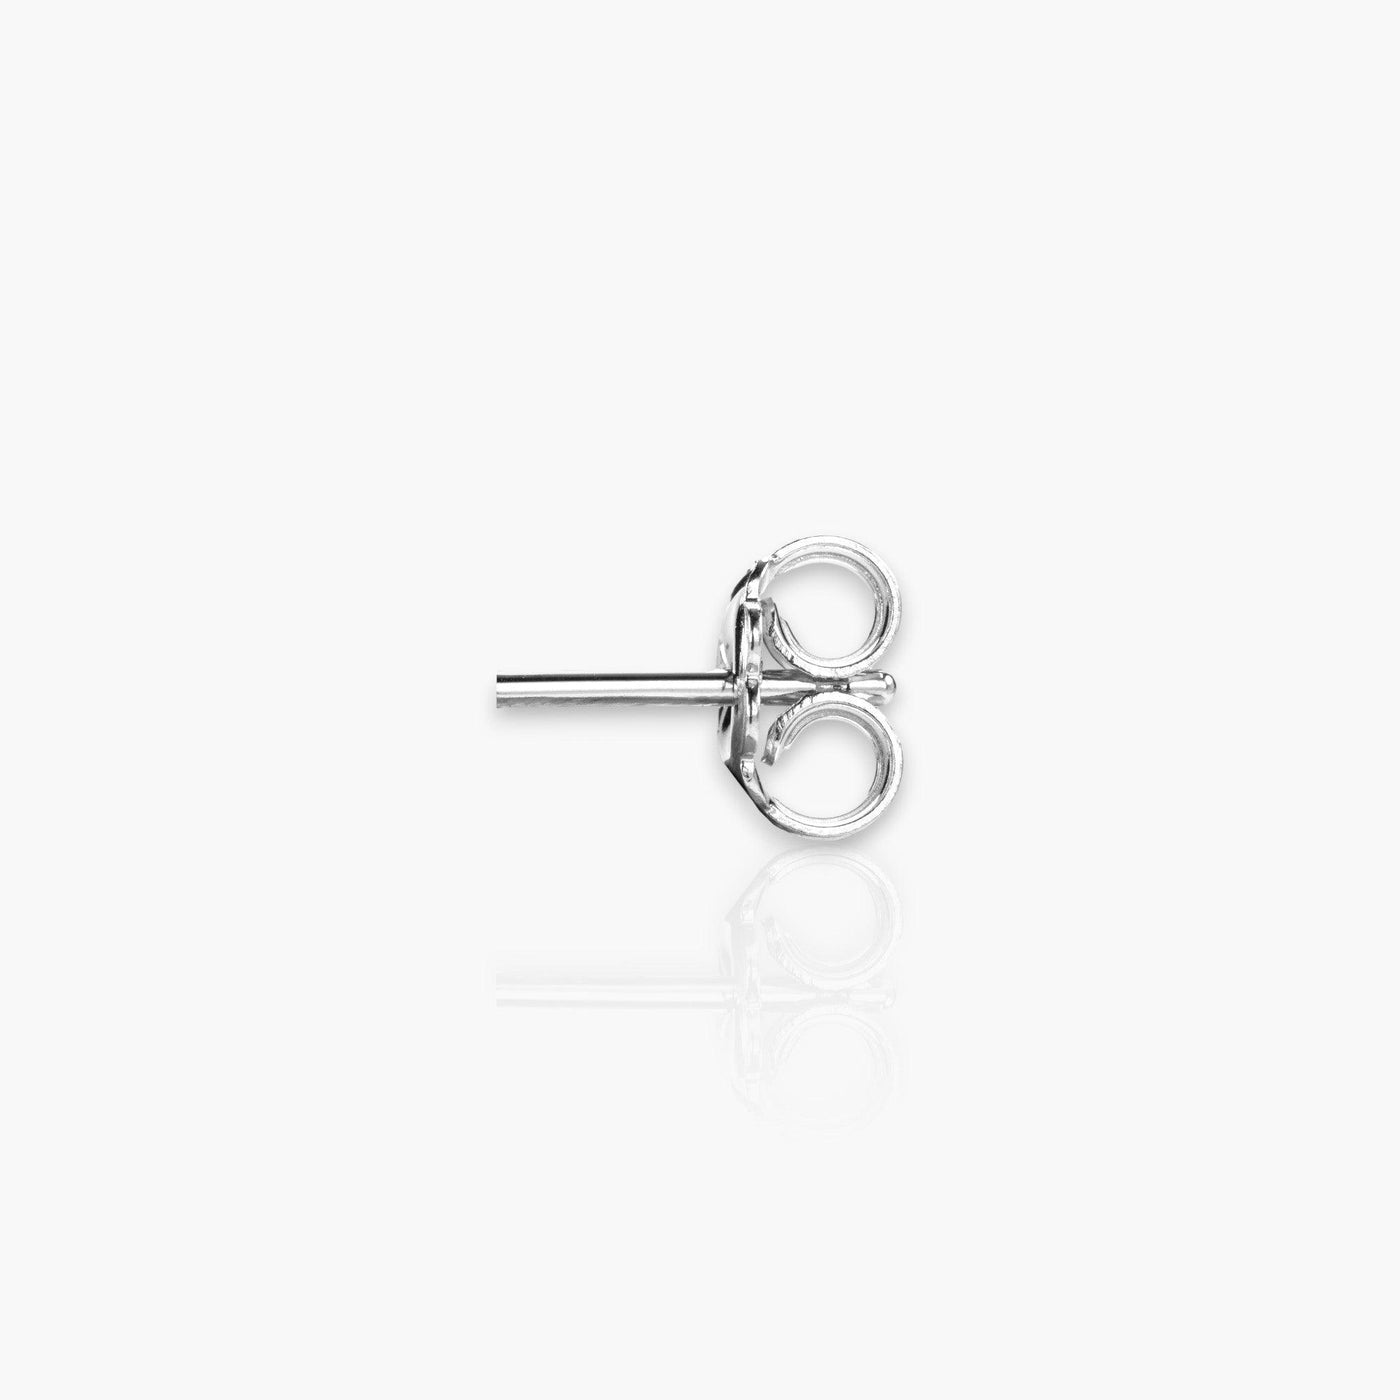 Earrings, White Gold and 24 Diamonds (Round) - Moregola Fine Jewelry